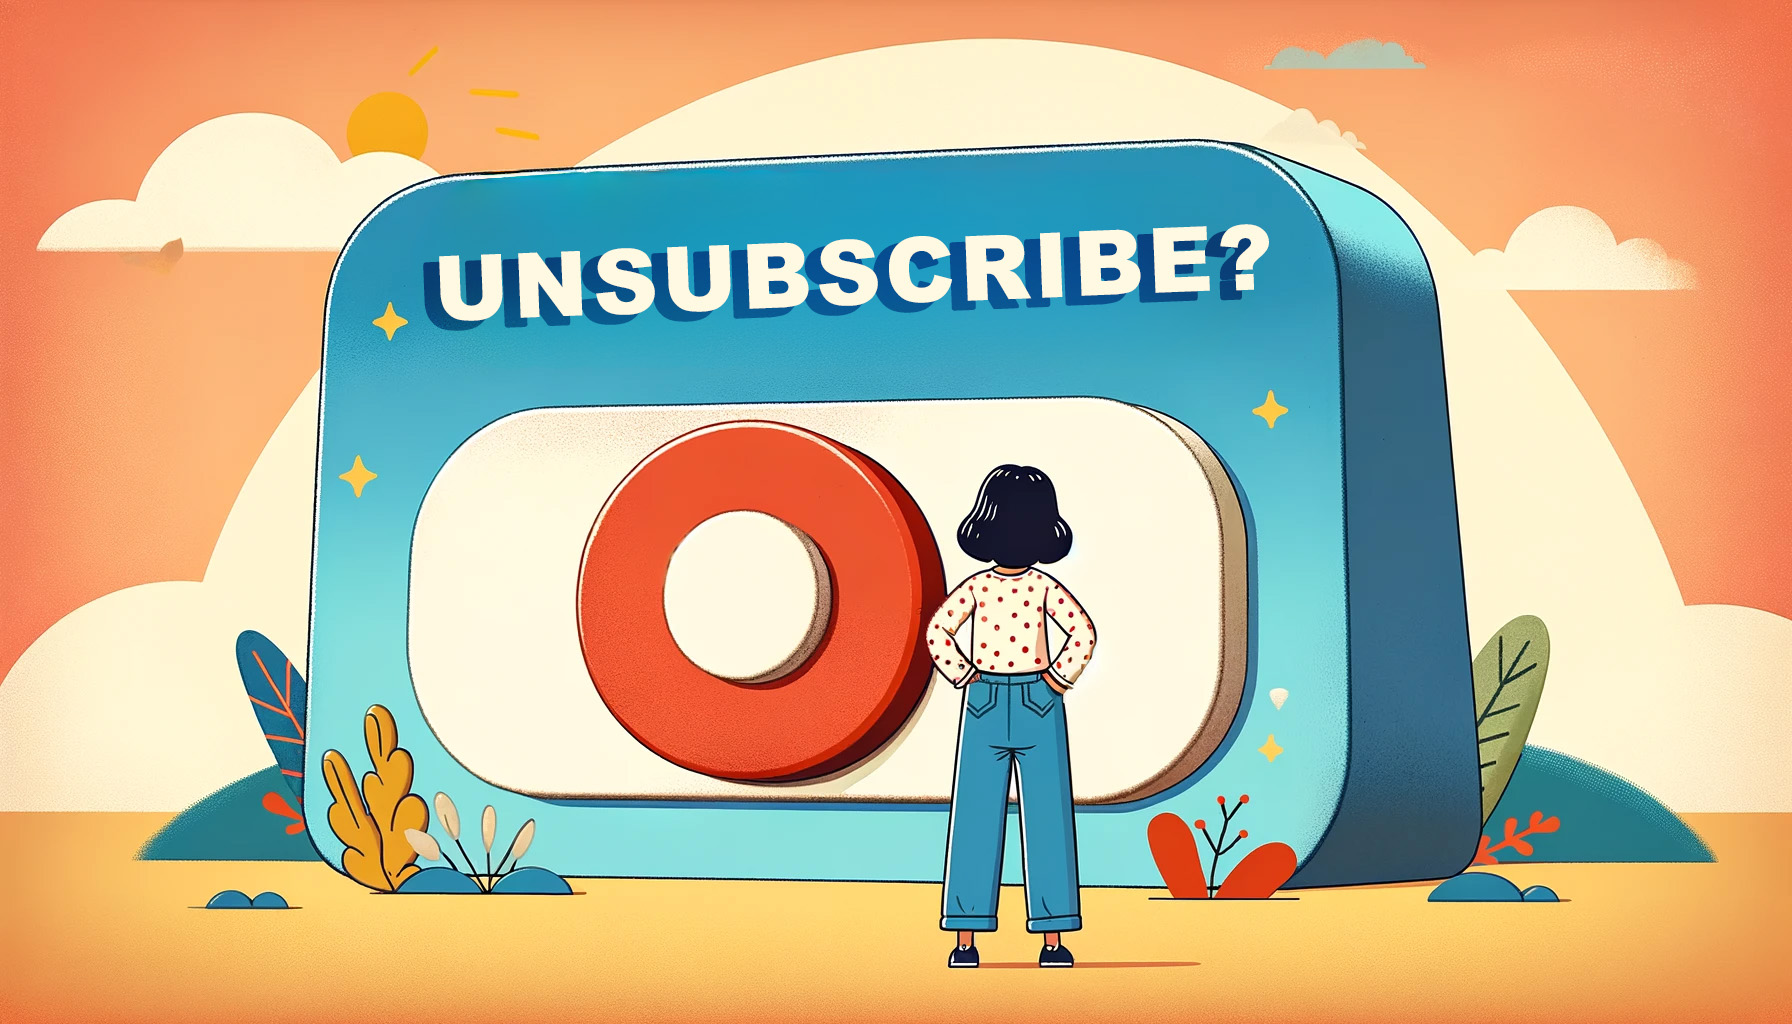 "unsubscribe?" written on a giant button with a woman standing in front